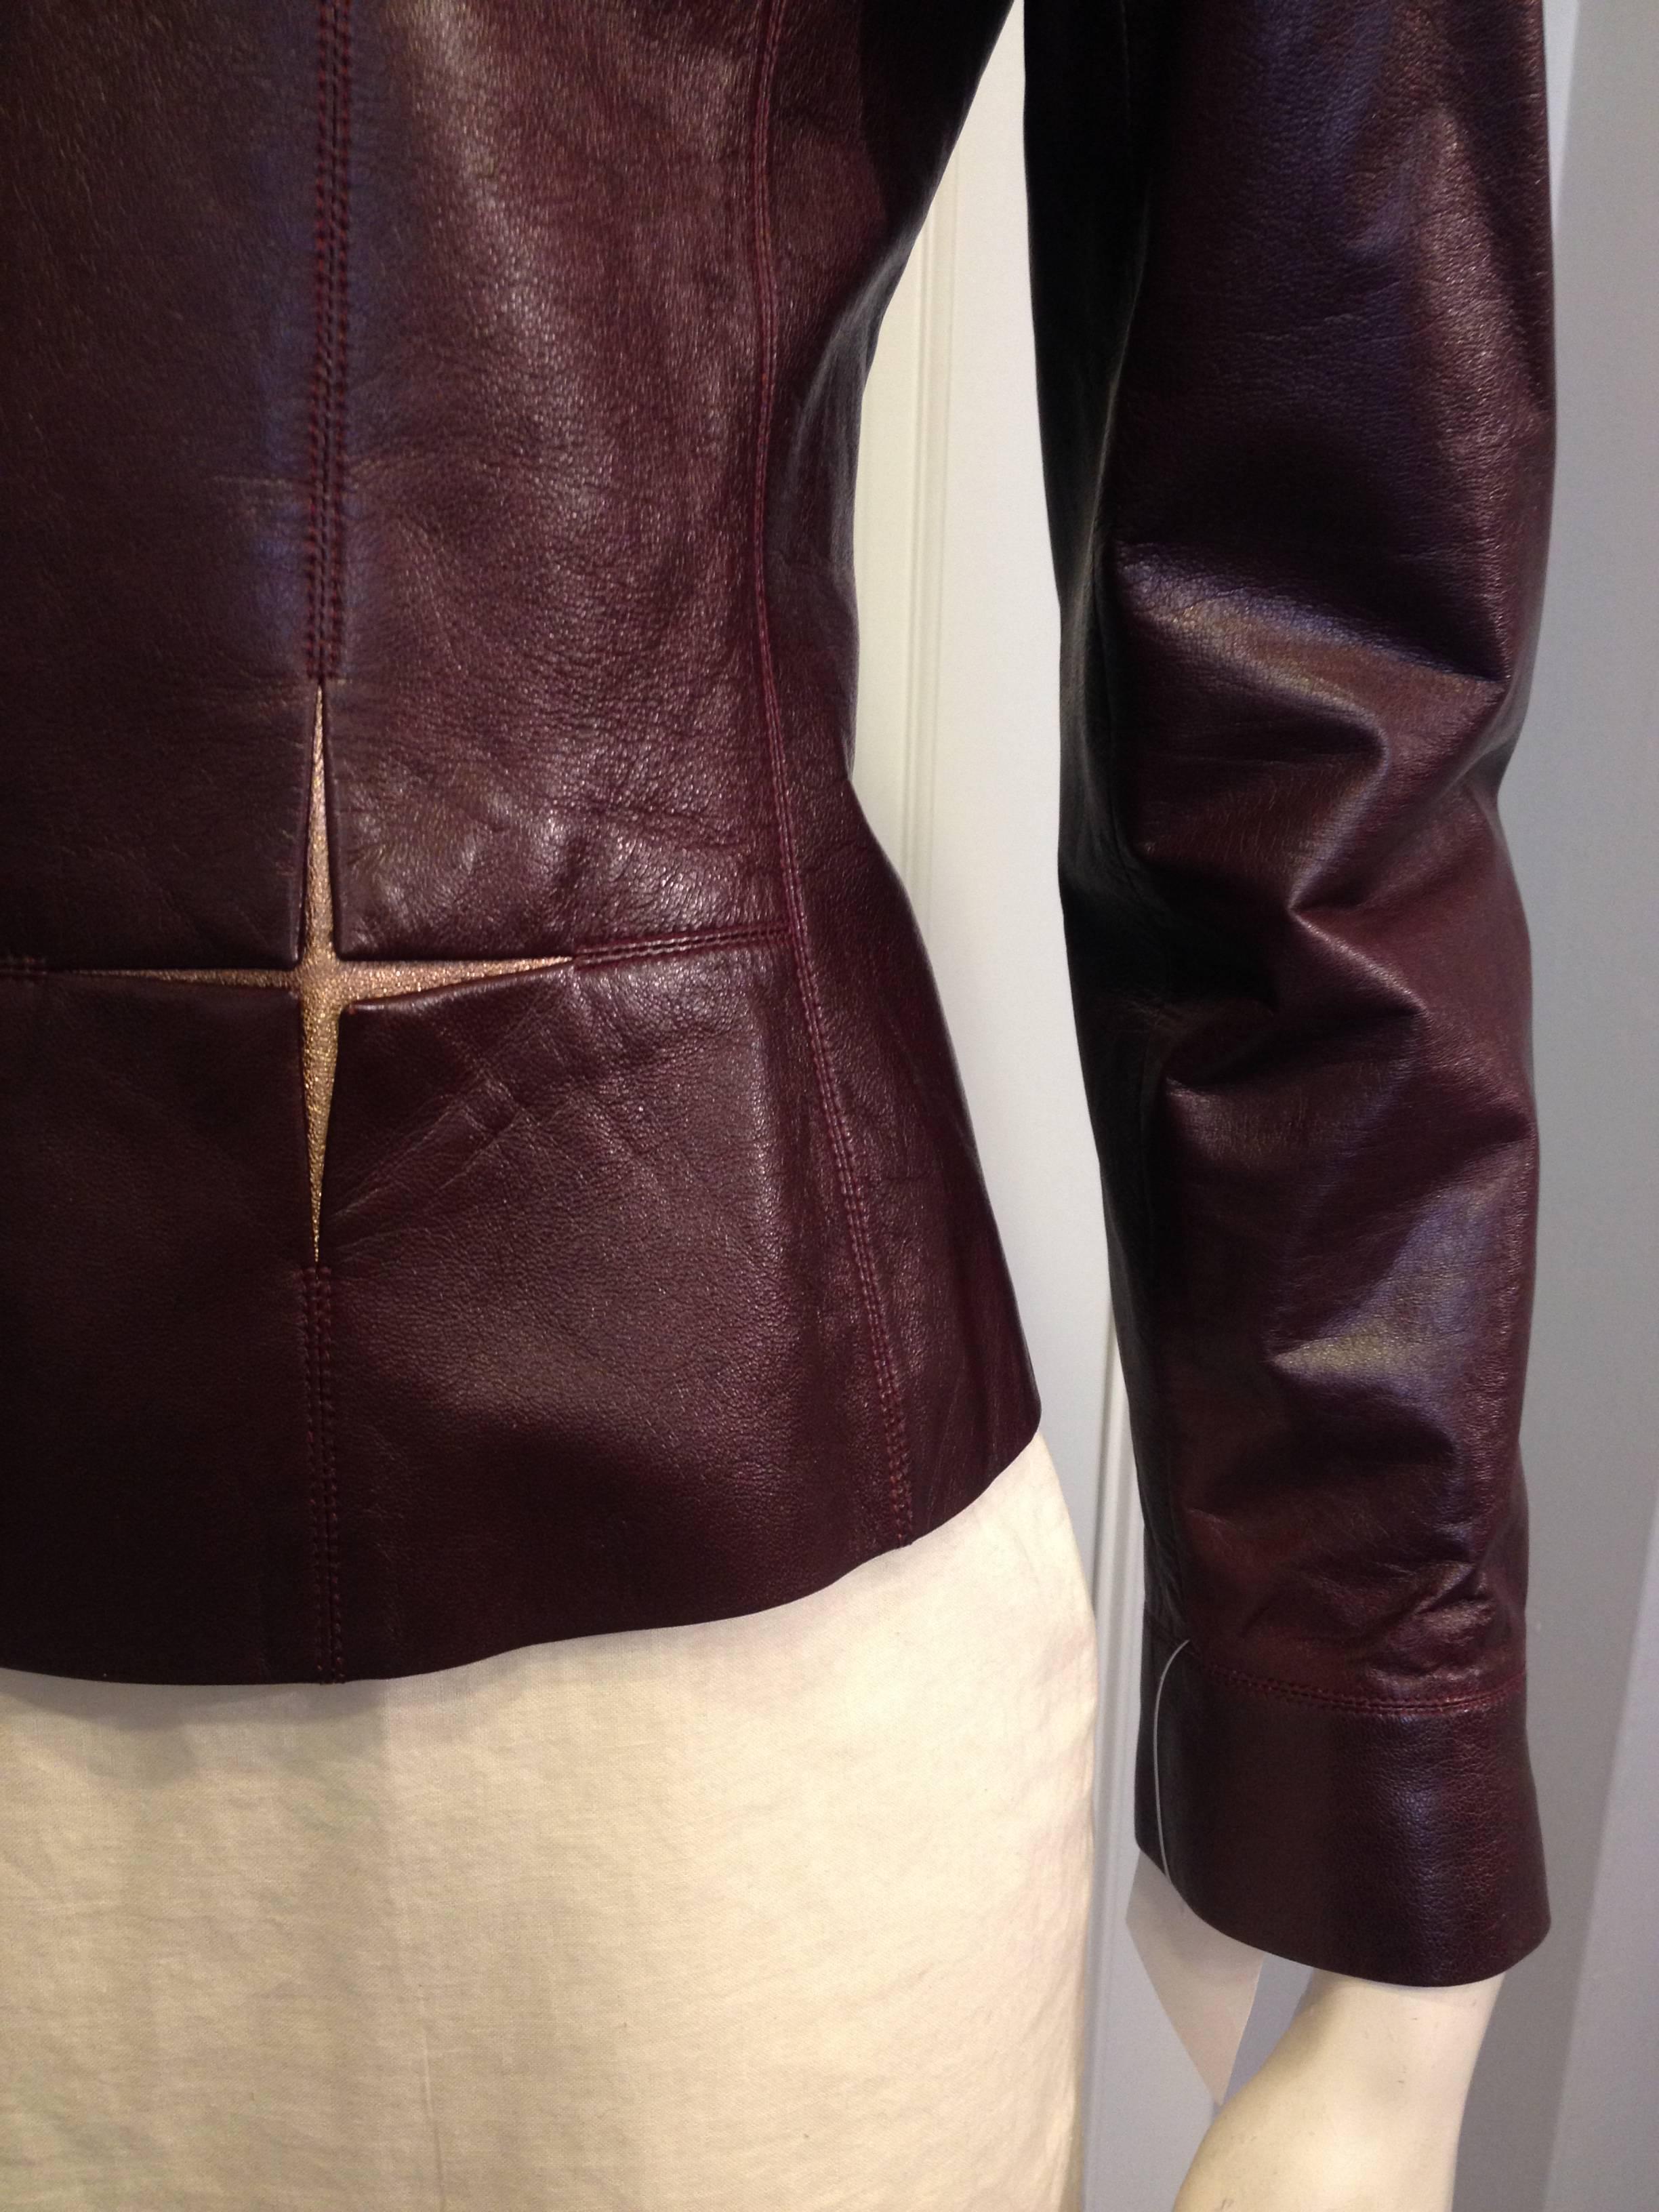 Chanel Burgundy Leather Jacket with Rose Gold Insets In Excellent Condition For Sale In San Francisco, CA